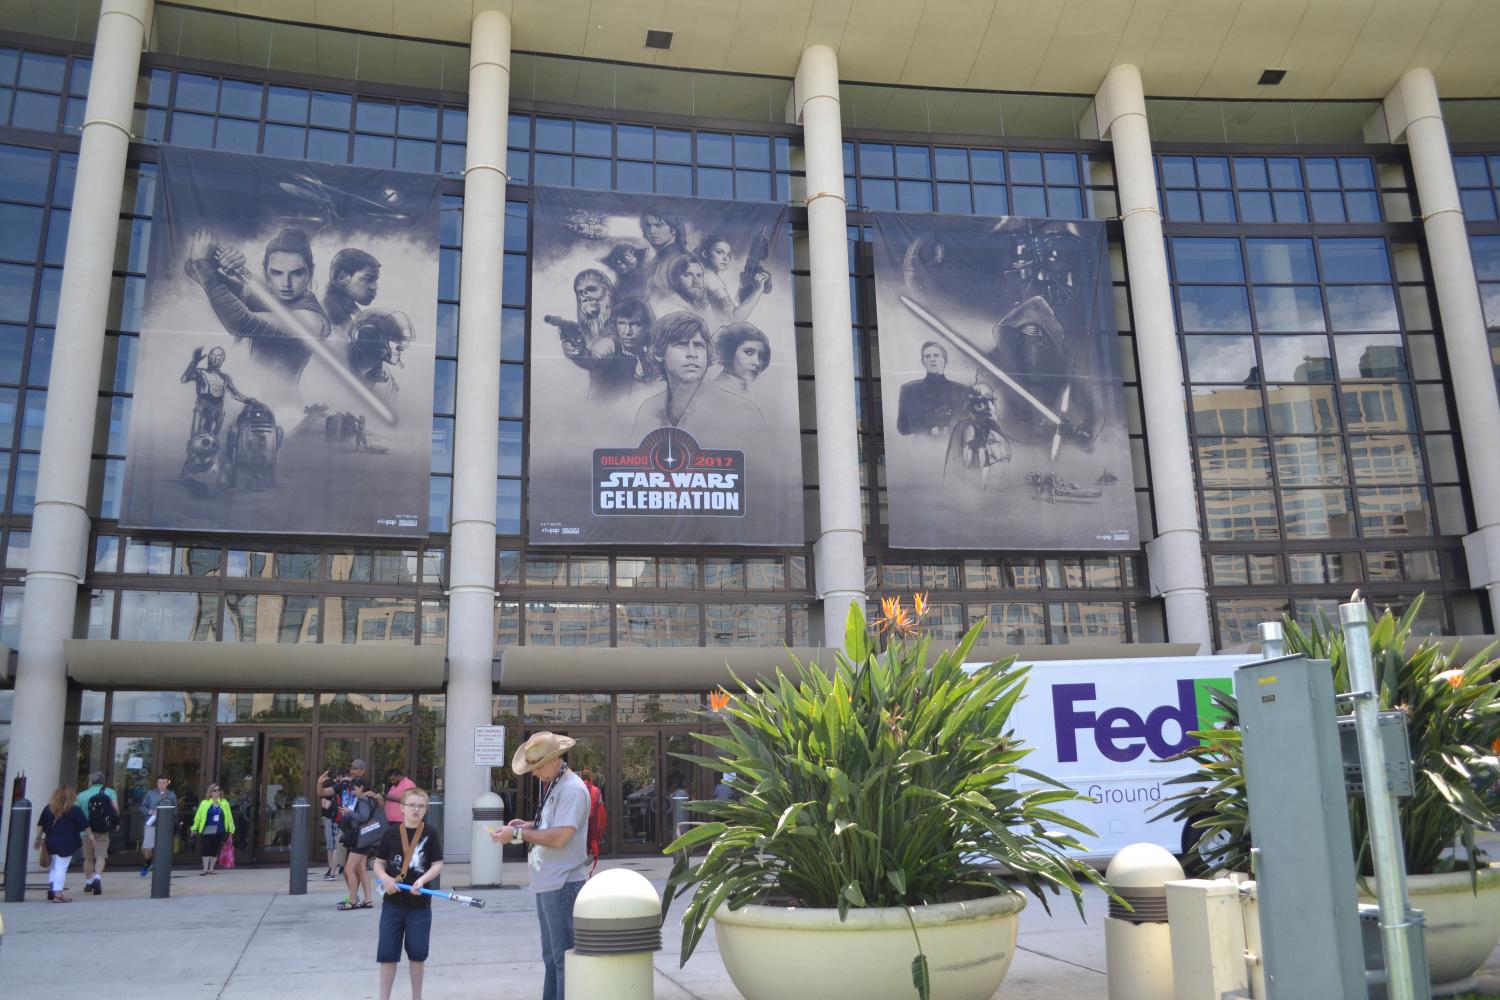 Banners+hung+outside+the+West+Concourse+of+the+Orange+County+Convention+Center+for+Star+Wars+Celebration.+